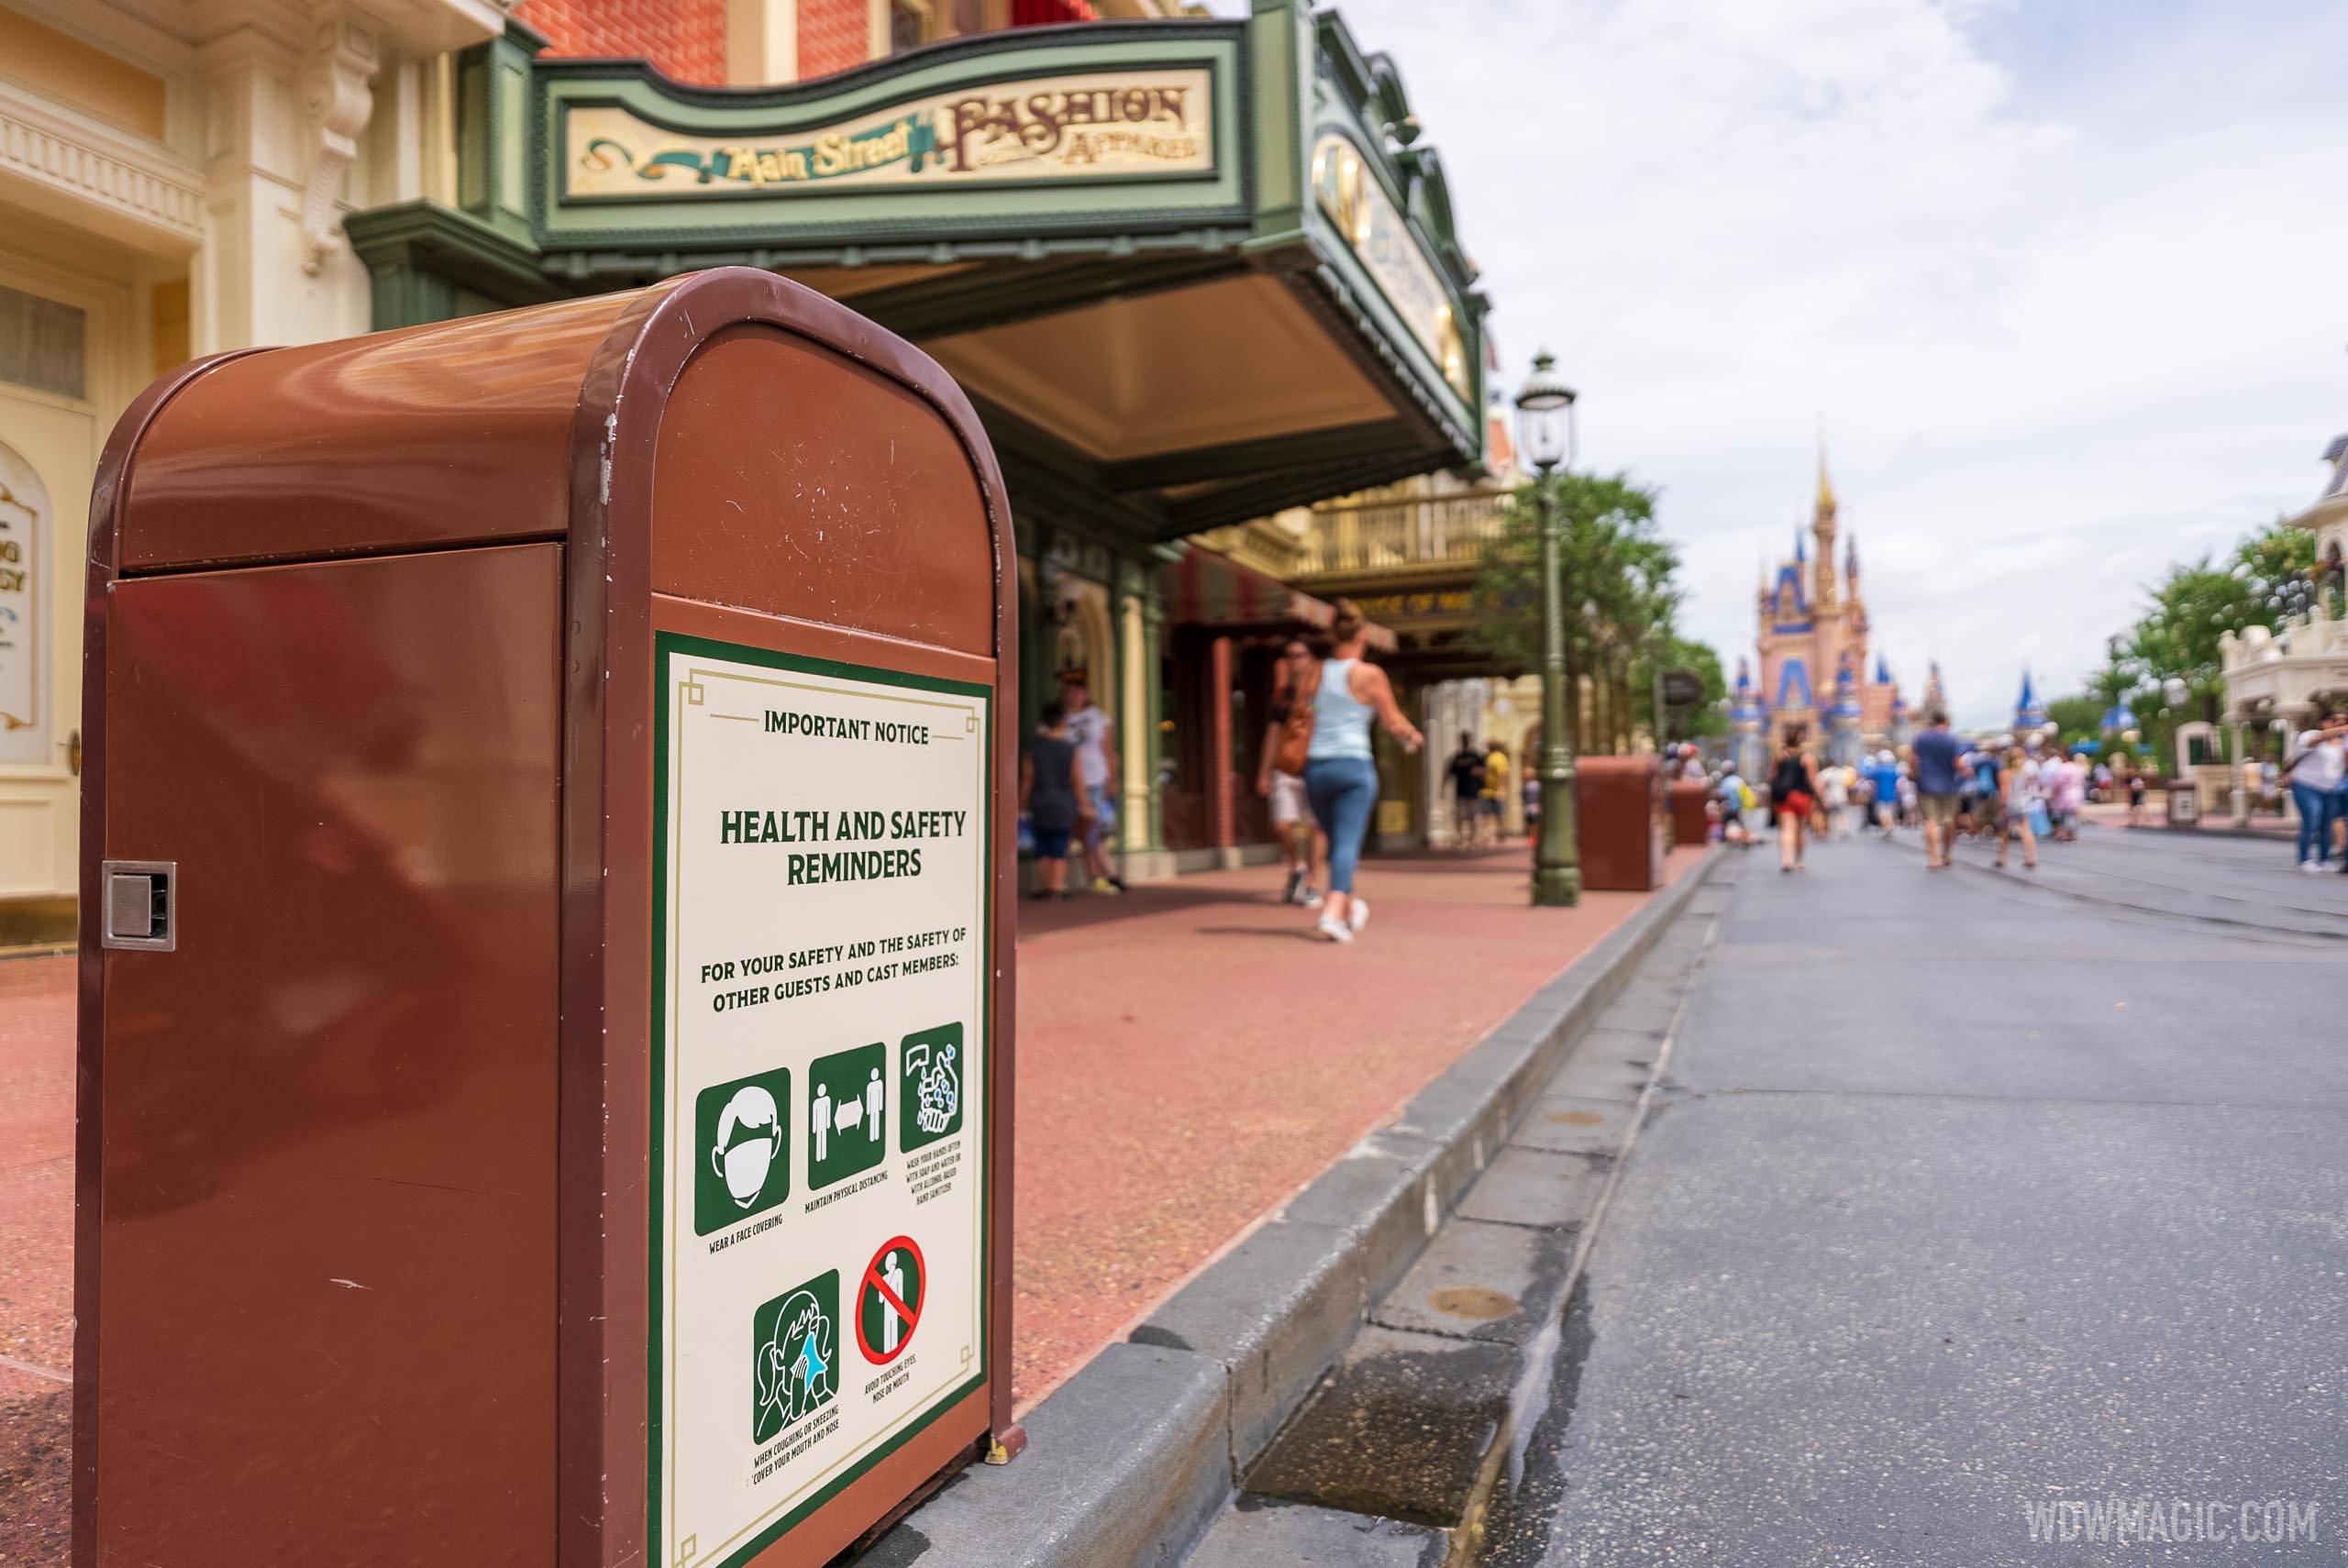 Health and safety reminders are still in place on Main Street U.S.A.